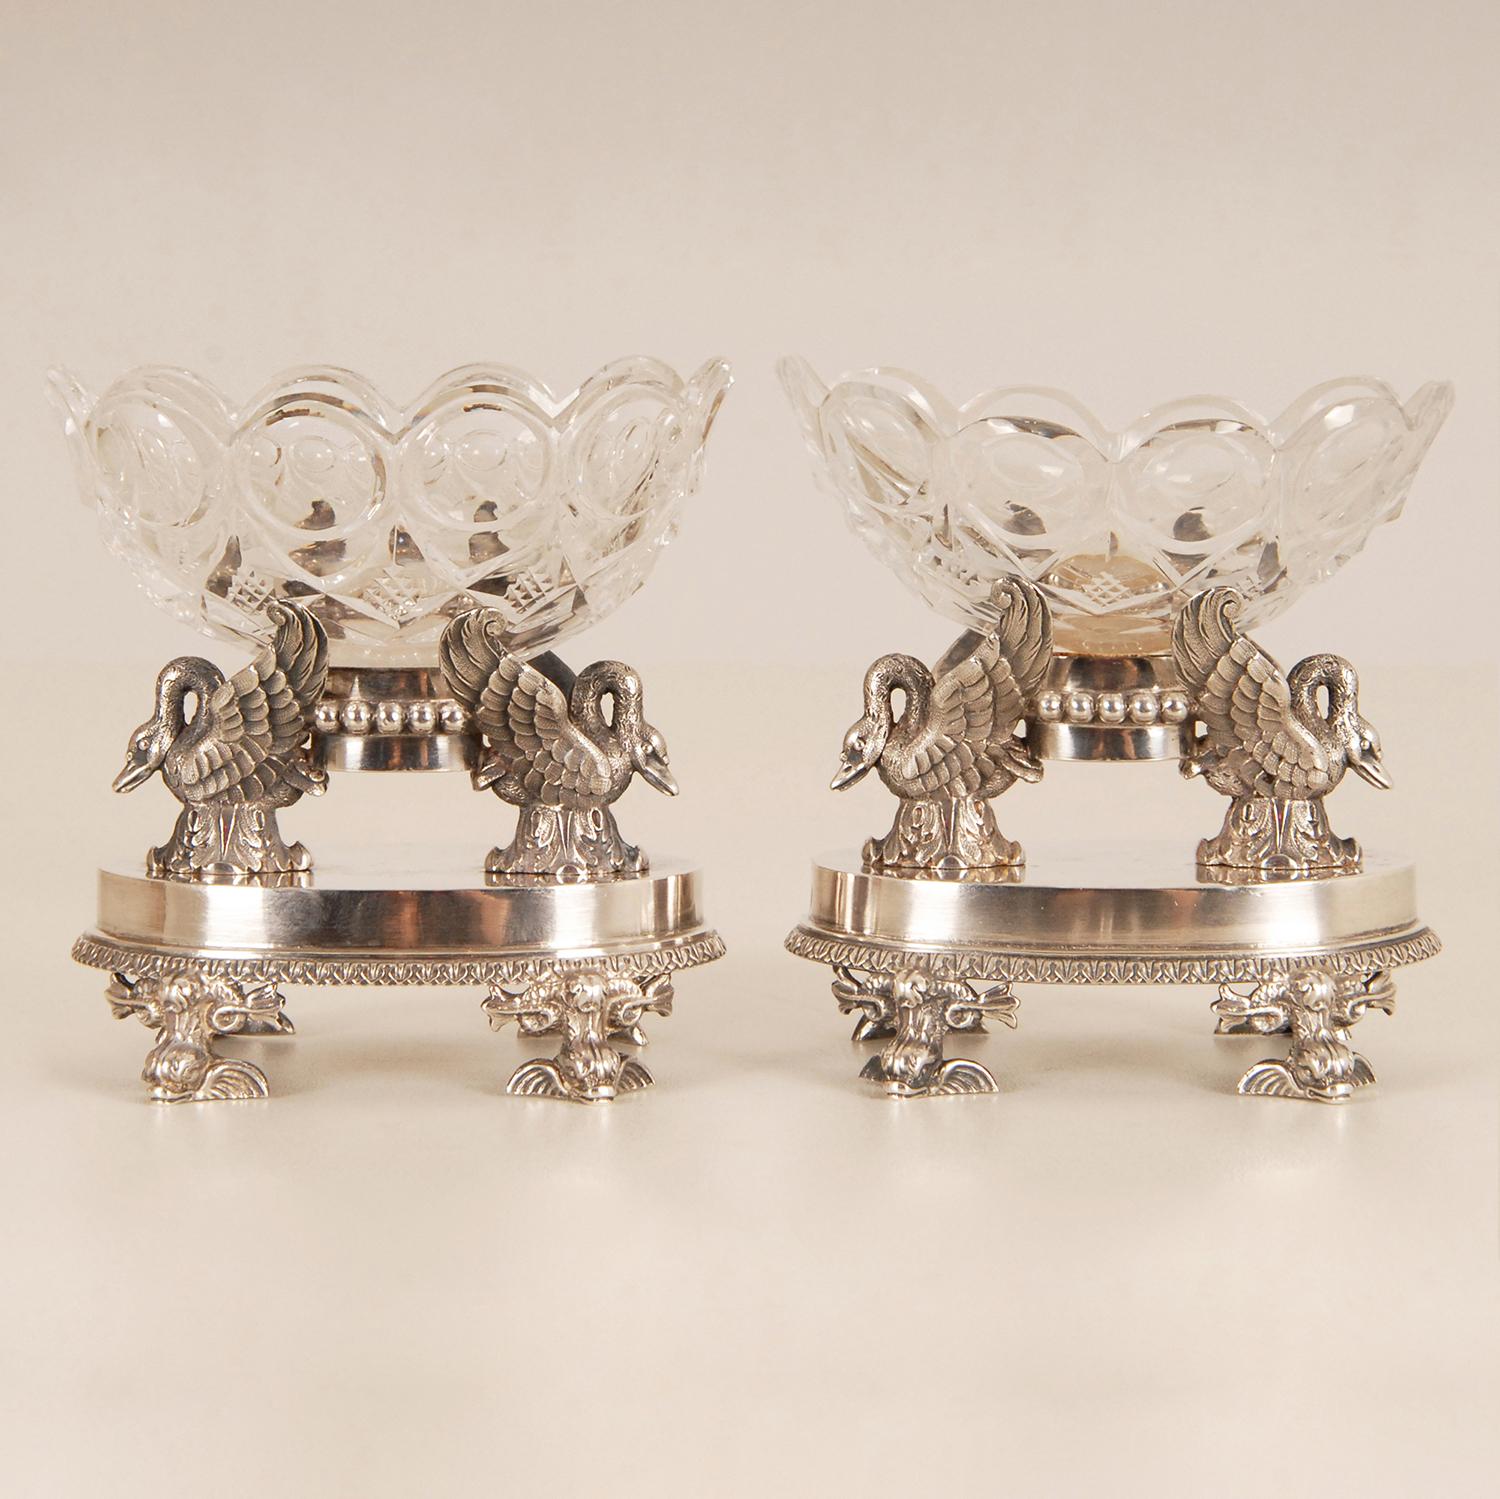 18th Century Empire Silver Baccarat Crystal Salt Cellars  F. Durand Napoleonic  For Sale 8